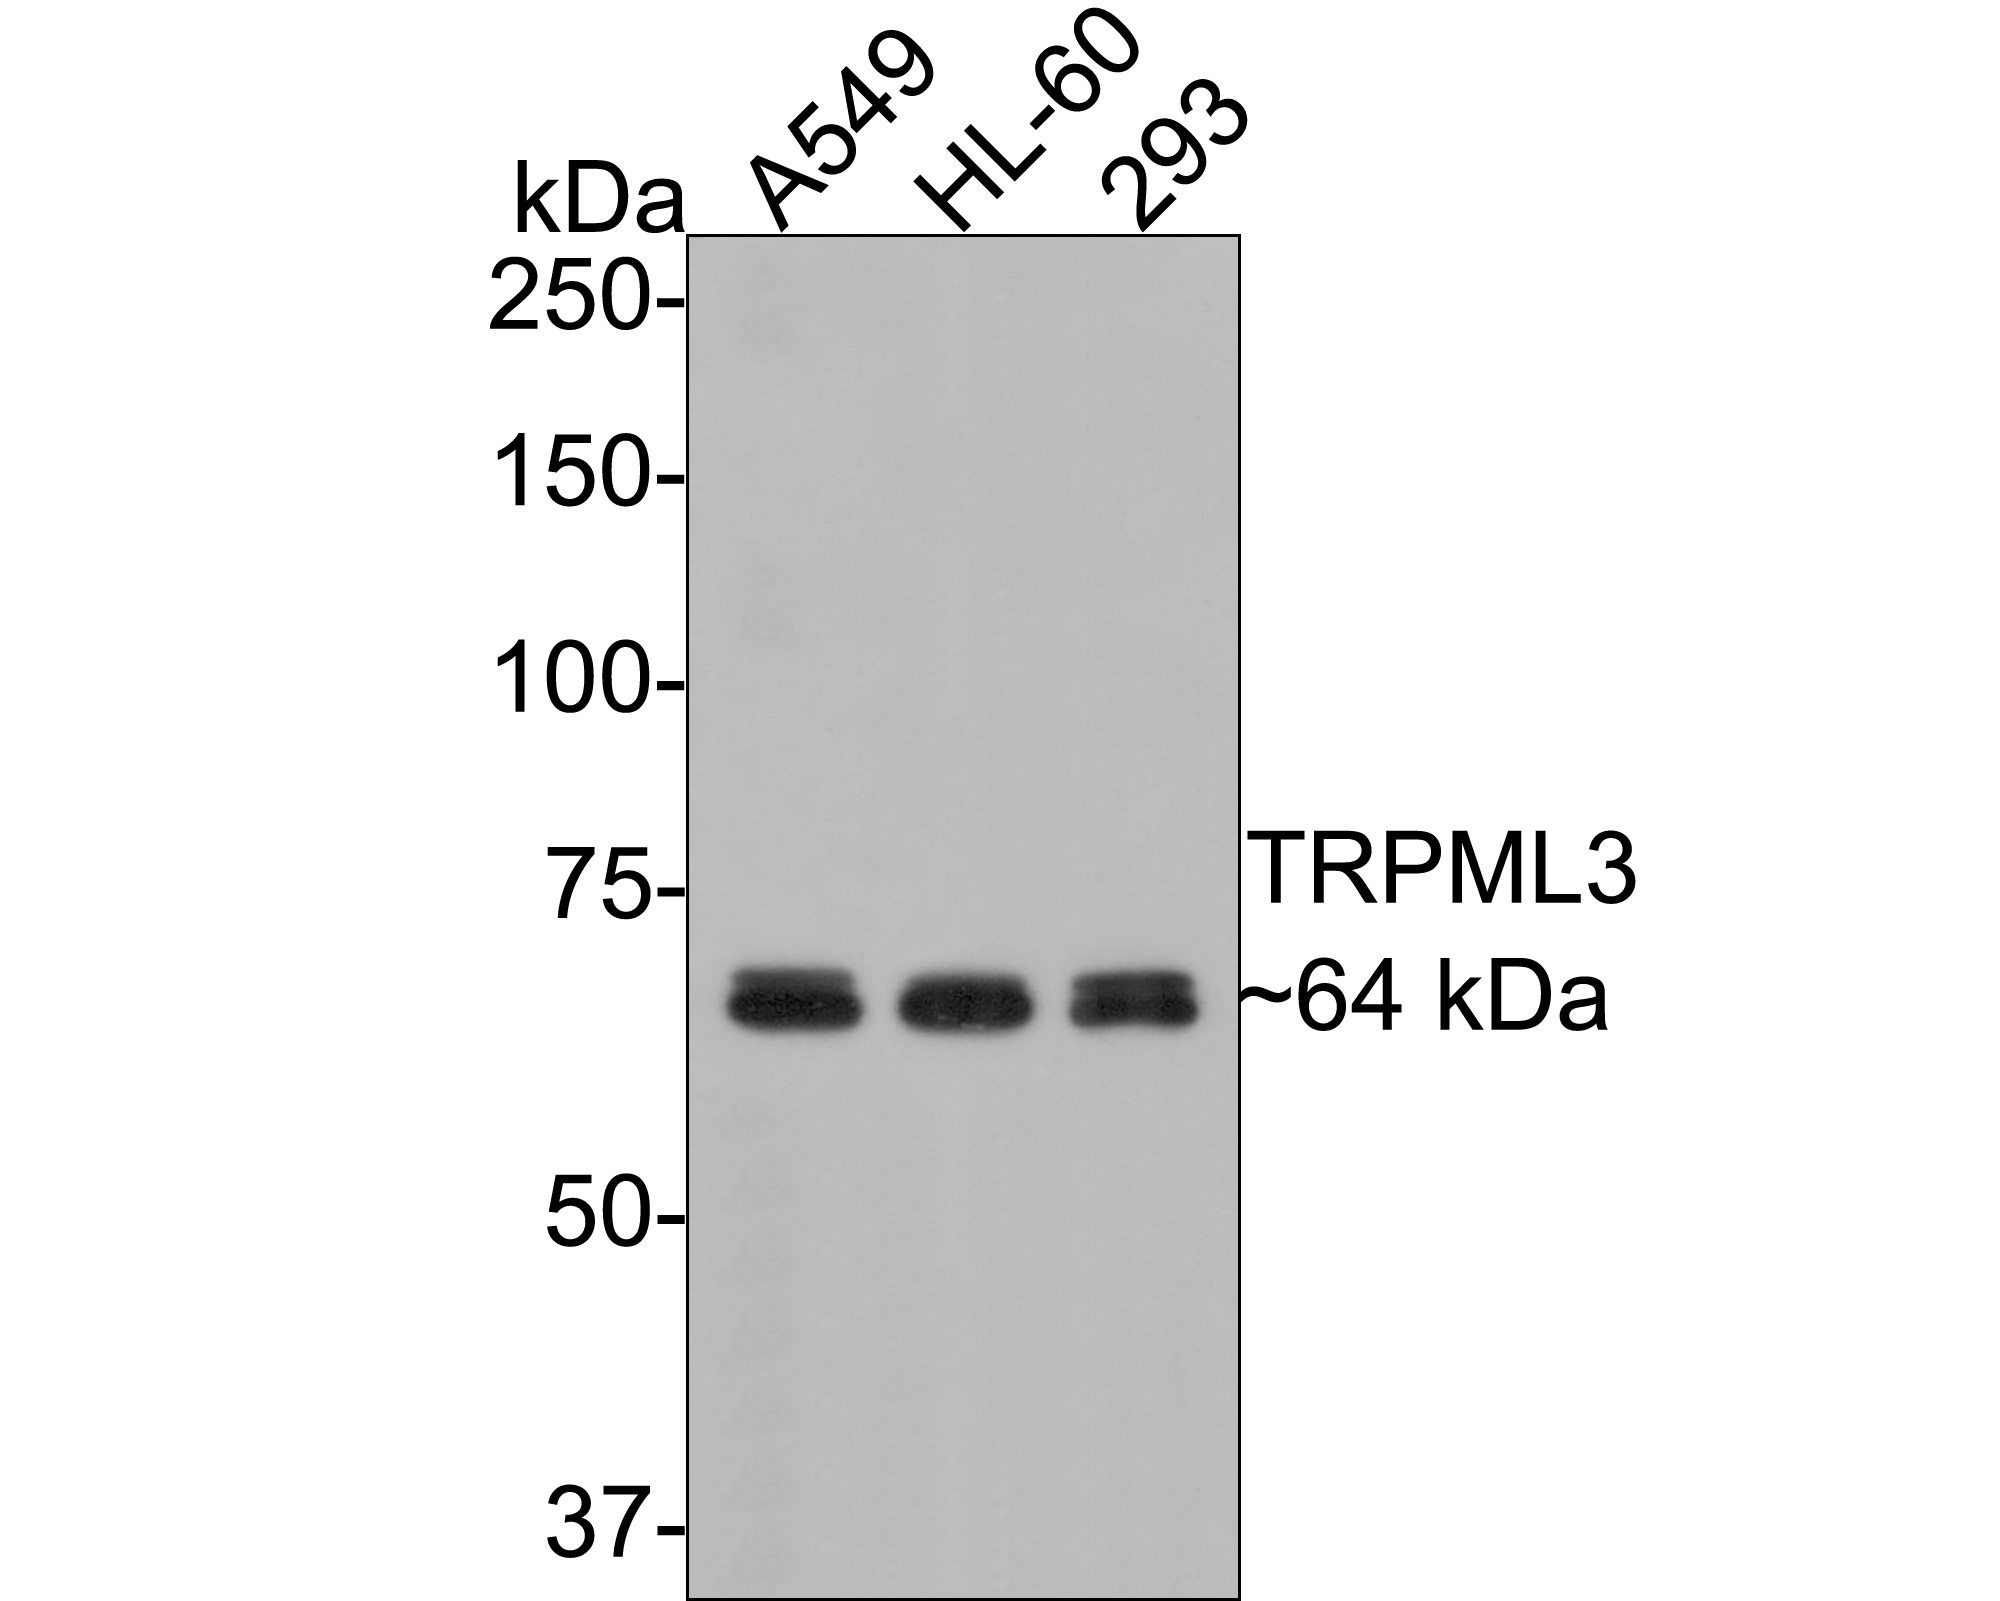 Western blot analysis of TRPML3 on 293 cell lysate. Proteins were transferred to a PVDF membrane and blocked with 5% BSA in PBS for 1 hour at room temperature. The primary antibody (ER1901-21, 1/500) was used in 5% BSA at room temperature for 2 hours. Goat Anti-Rabbit IgG - HRP Secondary Antibody (HA1001) at 1:5,000 dilution was used for 1 hour at room temperature.